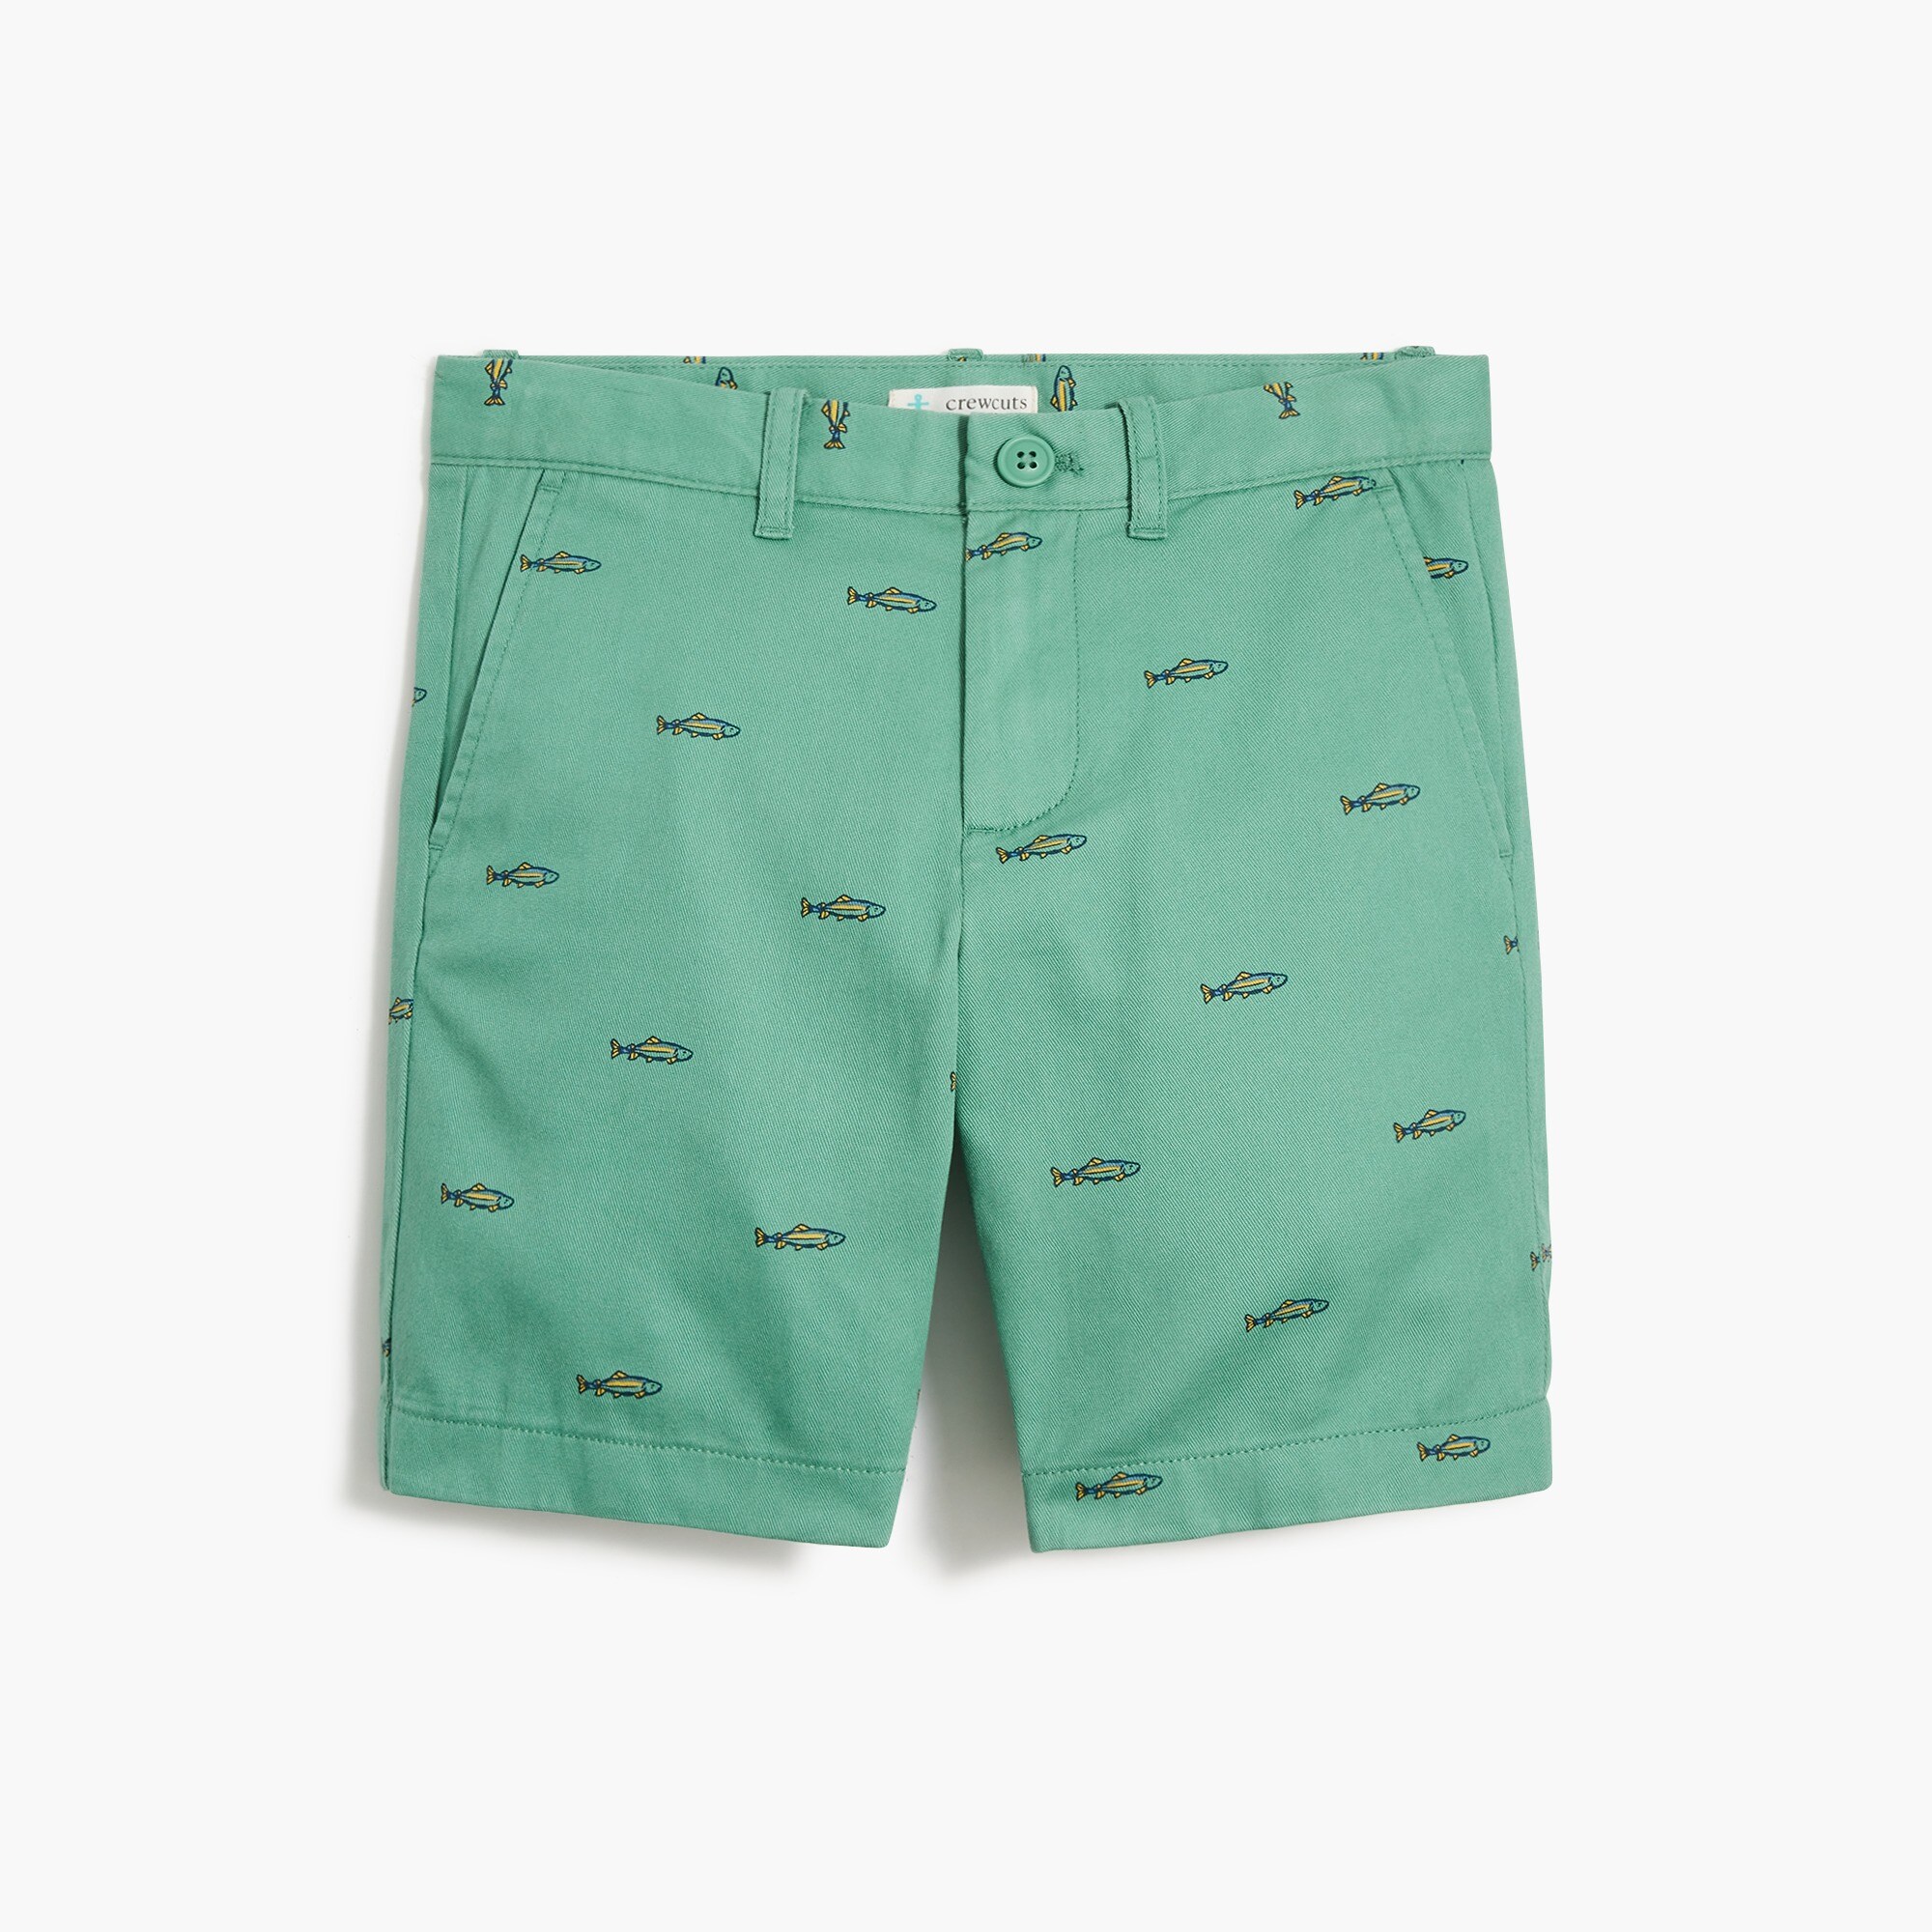  Boys' trout printed short